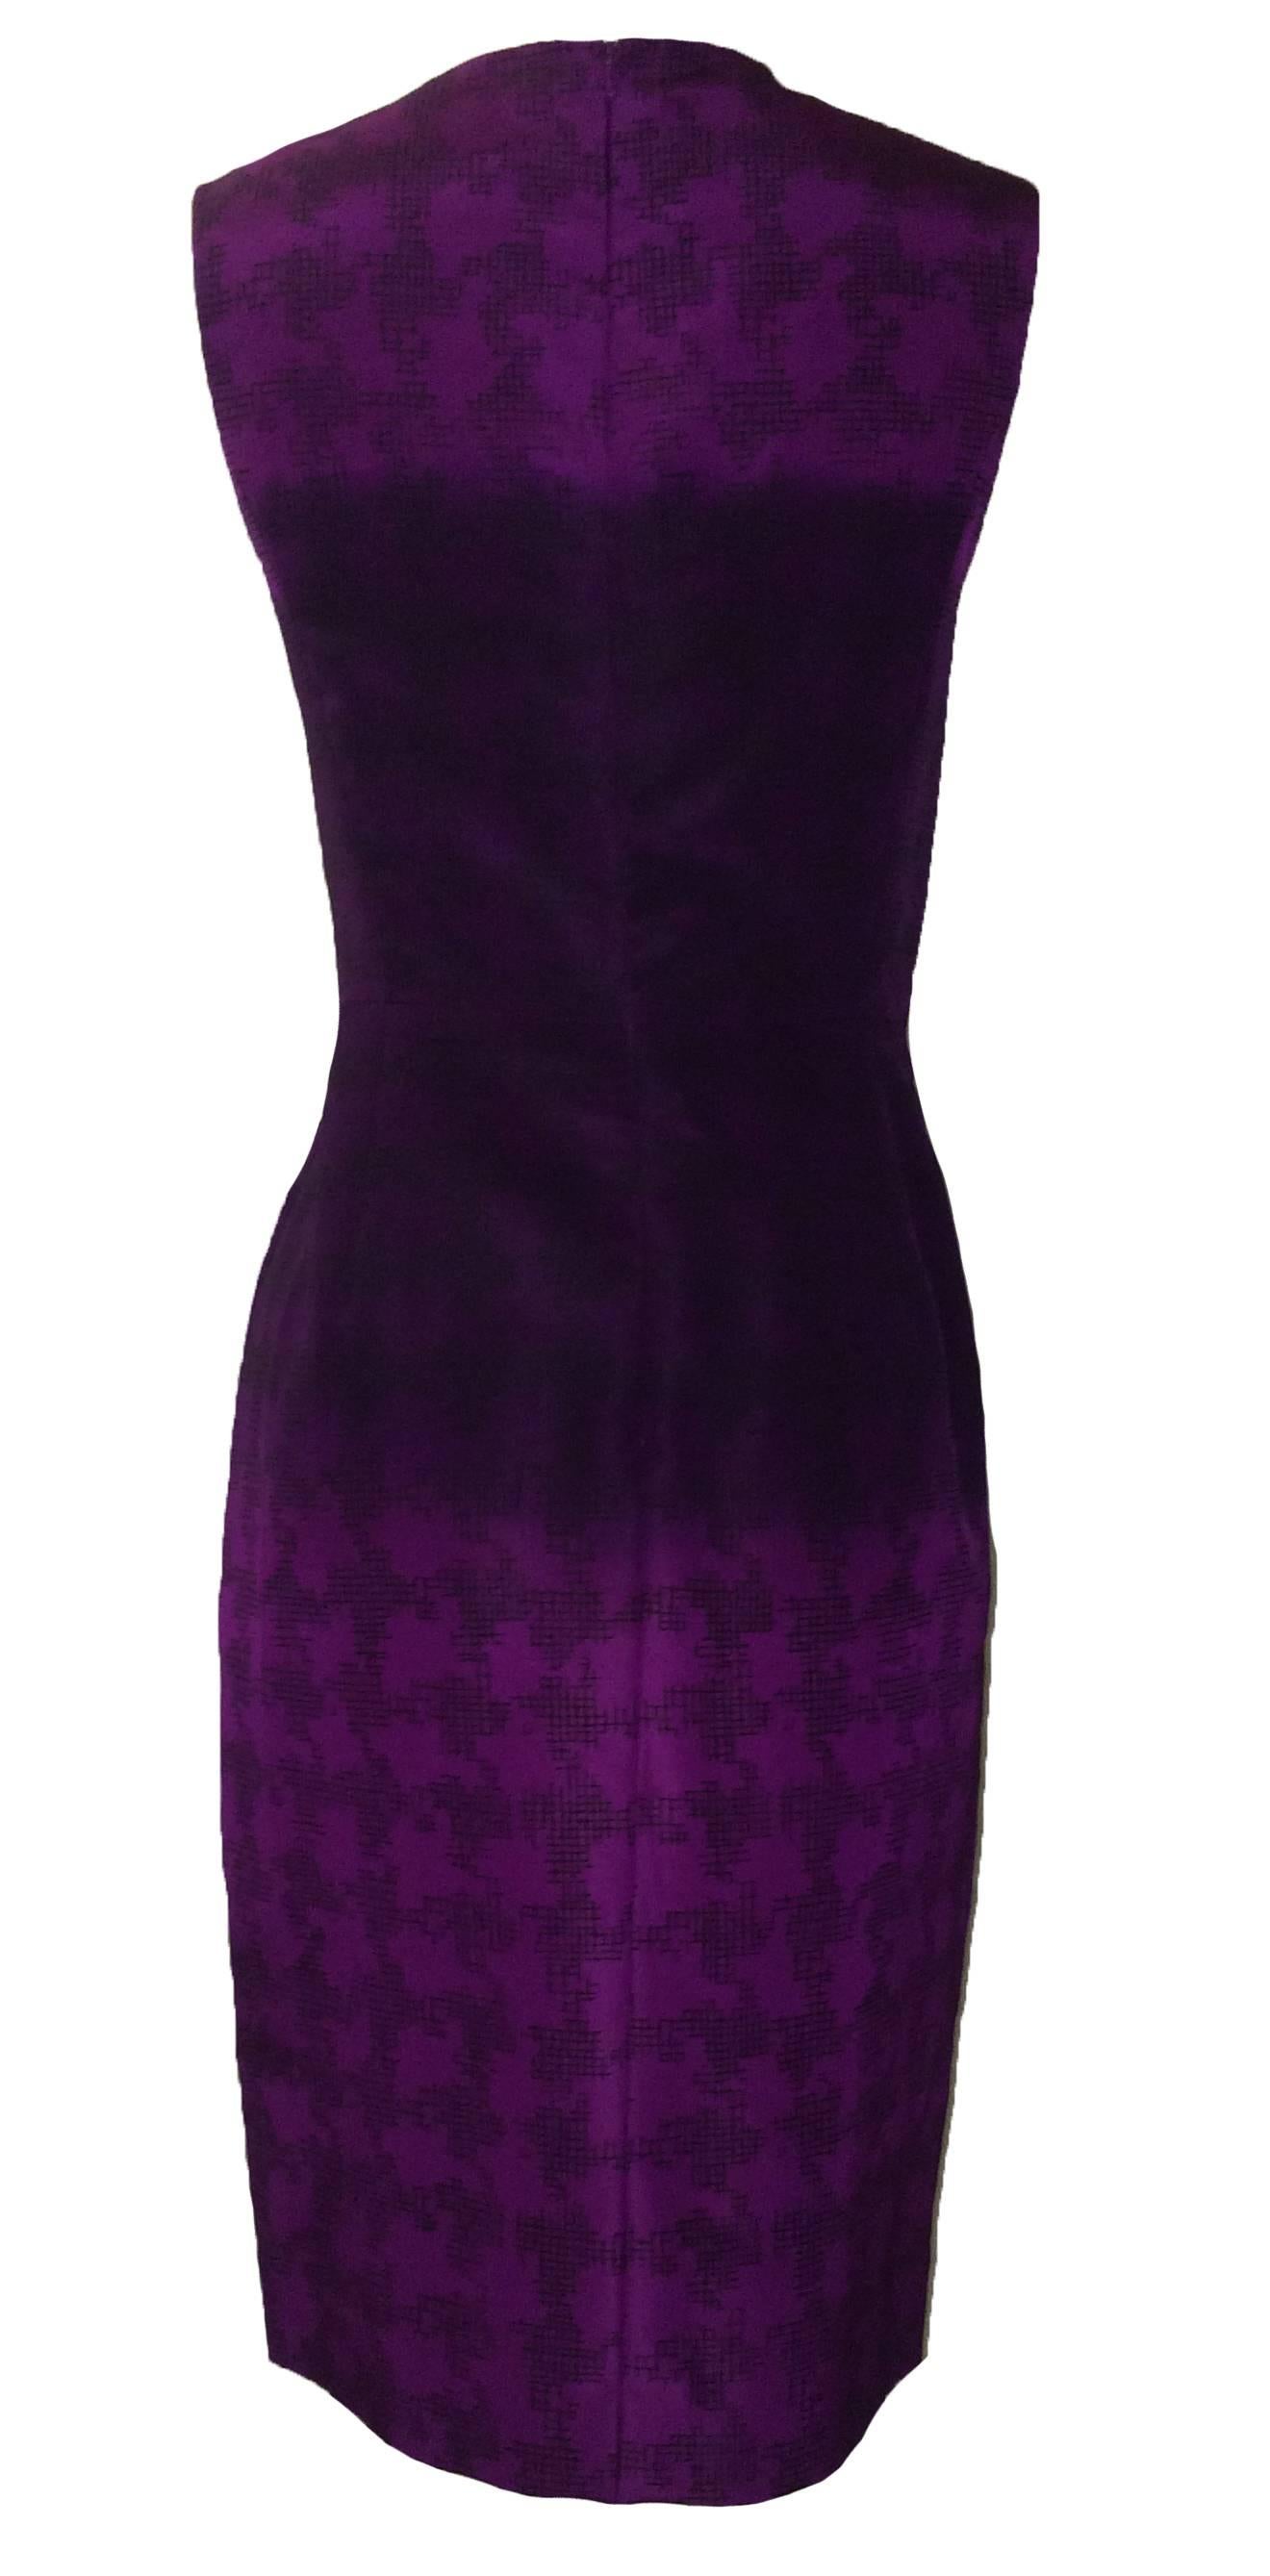 Oscar de la Renta silk pencil cut cocktail dress in a purple checked houndstooth pattern and ombre mid section. Back zip and hook and eye.

100% silk.

Made in USA.

Size 8. Runs slightly small, see measurements.
Bust 34